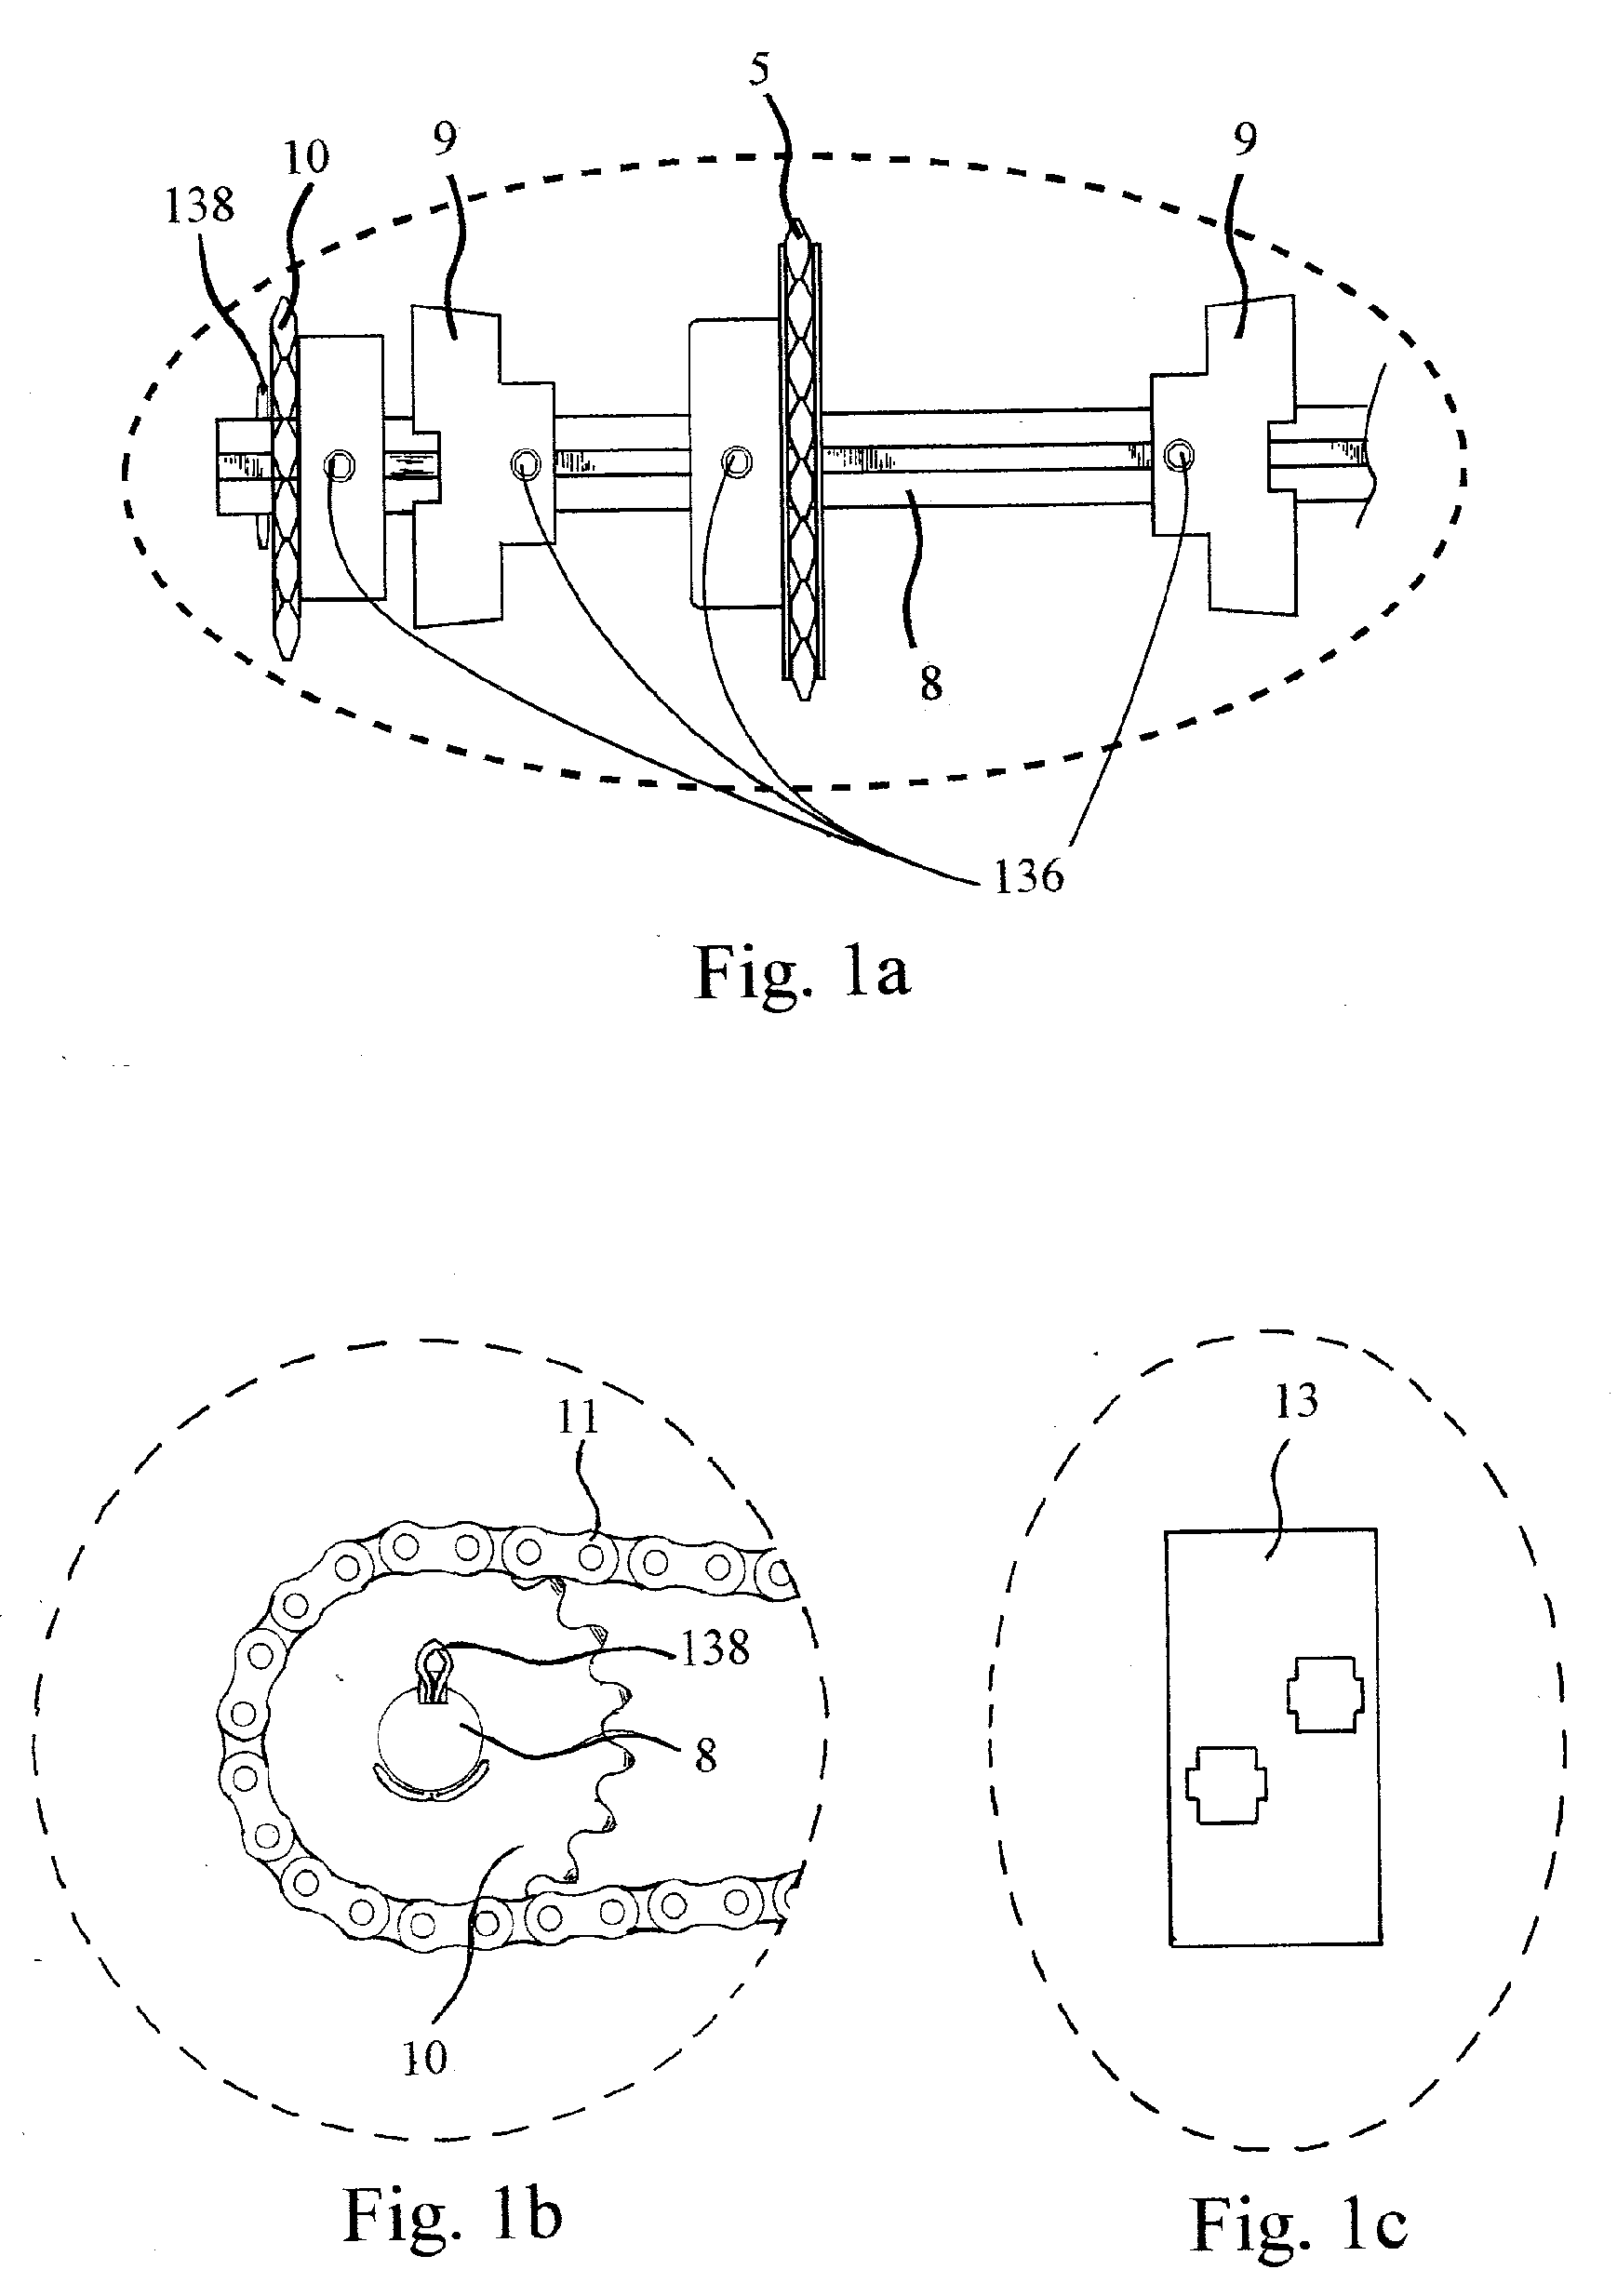 System and Method For Raising and Lowering a Bed